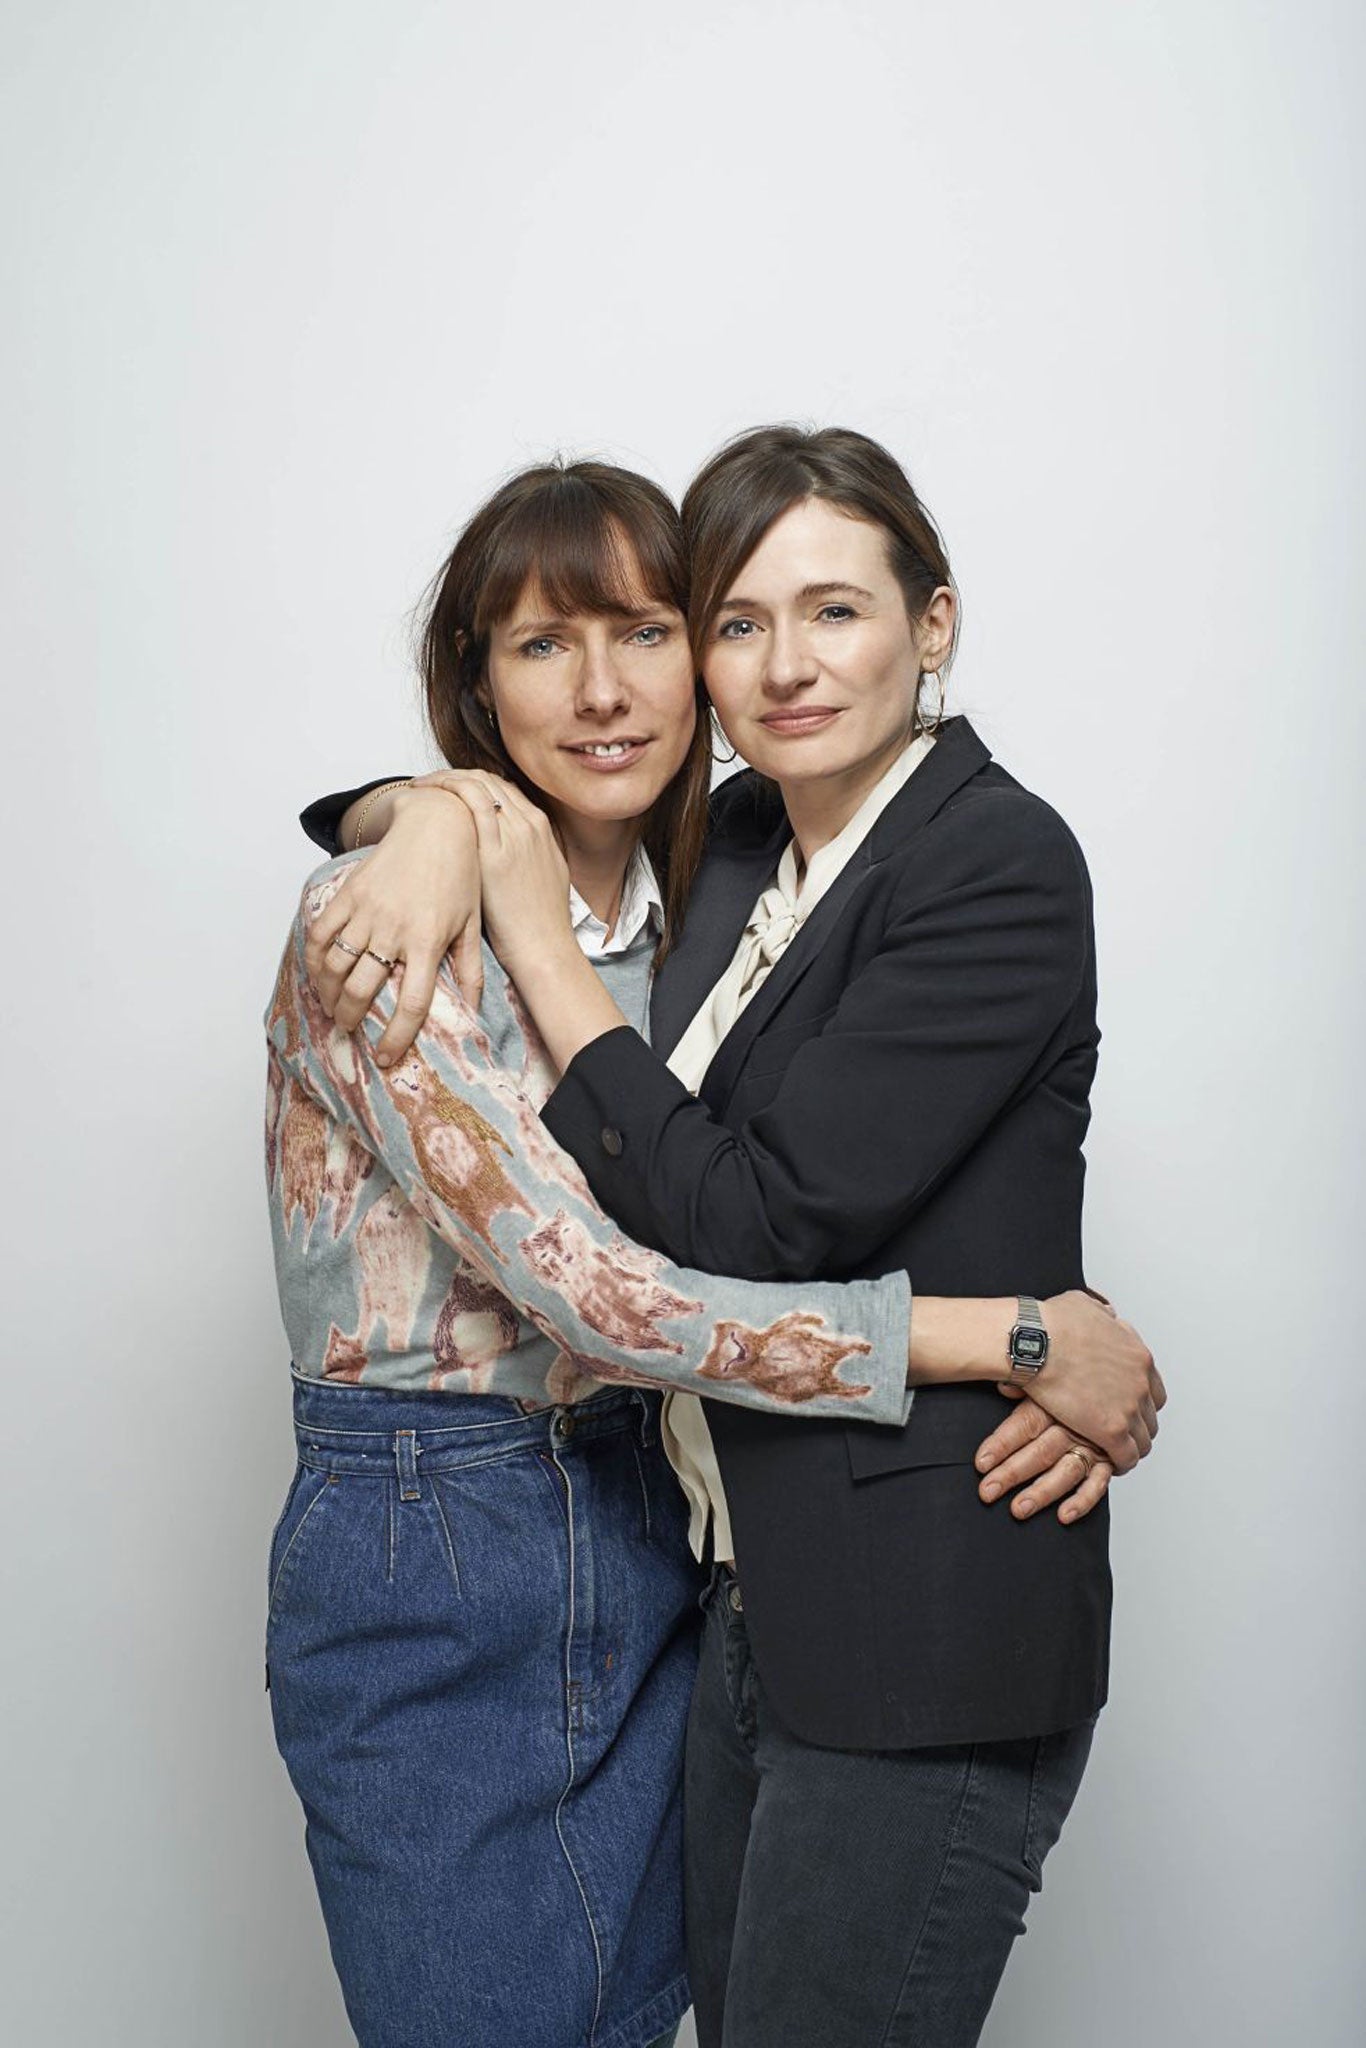 Friends in high places Emily Mortimer and Dolly Wells have created comedy gold out of their real-life relationship The Independent The Independent image